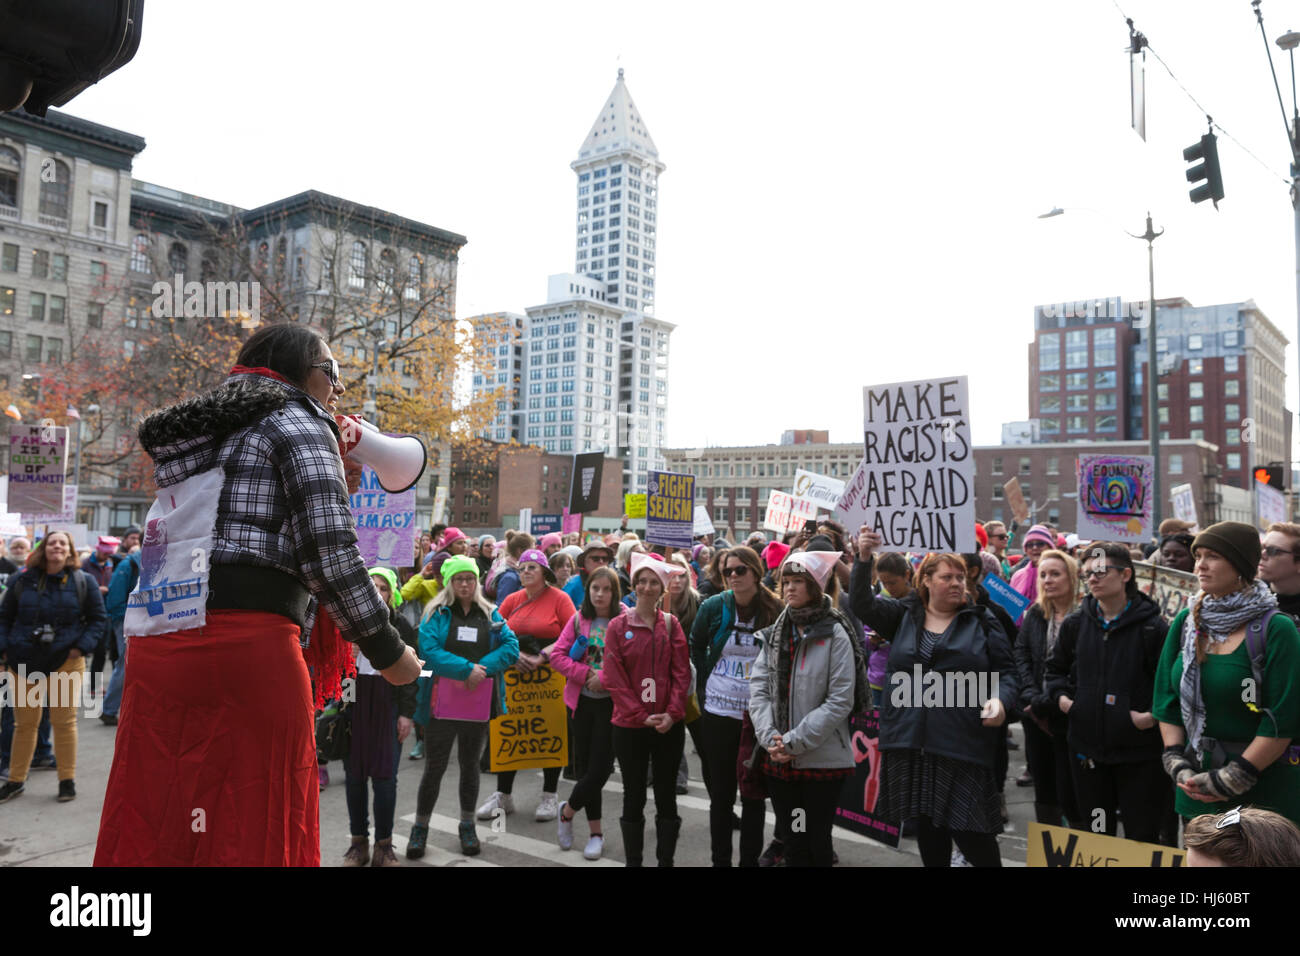 Seattle, United States. 21st Jan, 2017. Seattle, Washington: Woman speaks to supporters as they pass through downtown. Over 100,000 people attended the Womxn's March on Seattle on January 21, 2017 in solidarity with the national Women's March on Washington, DC The mission of the silent march is to bring diverse women together for collective action. Credit: Paul Gordon/Alamy Live News Stock Photo